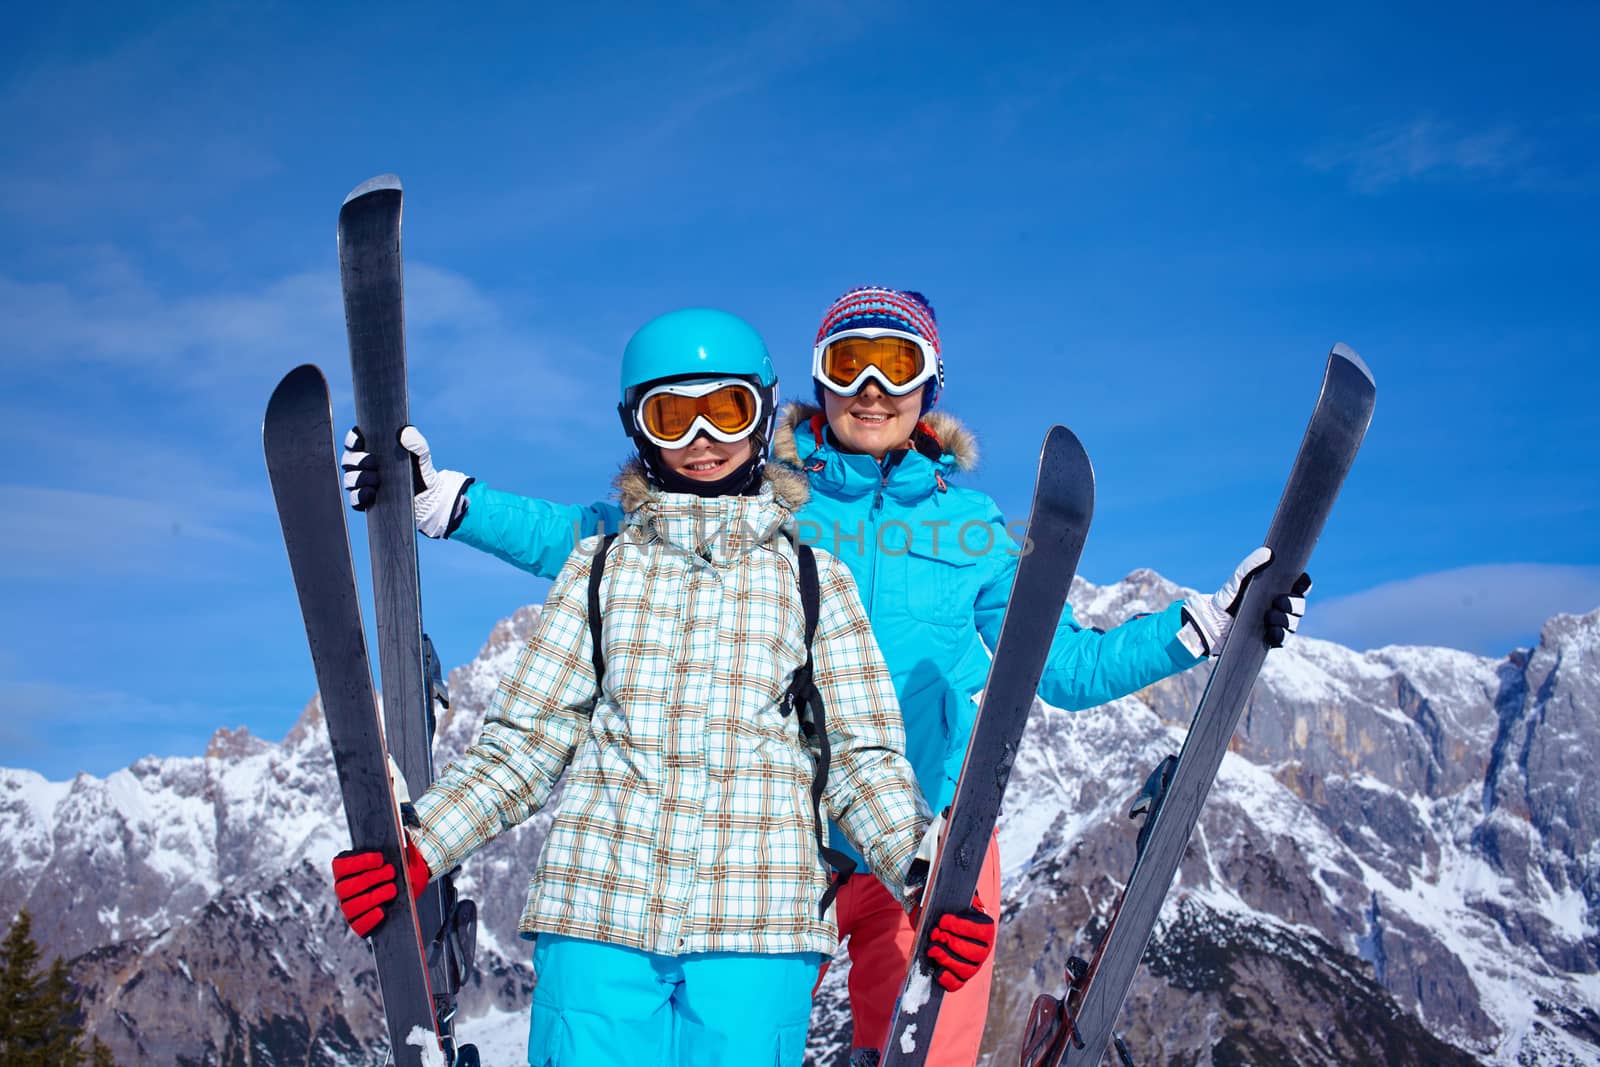 Ski, winter and fun - Family: mother and daughter enjoying winter vacations.